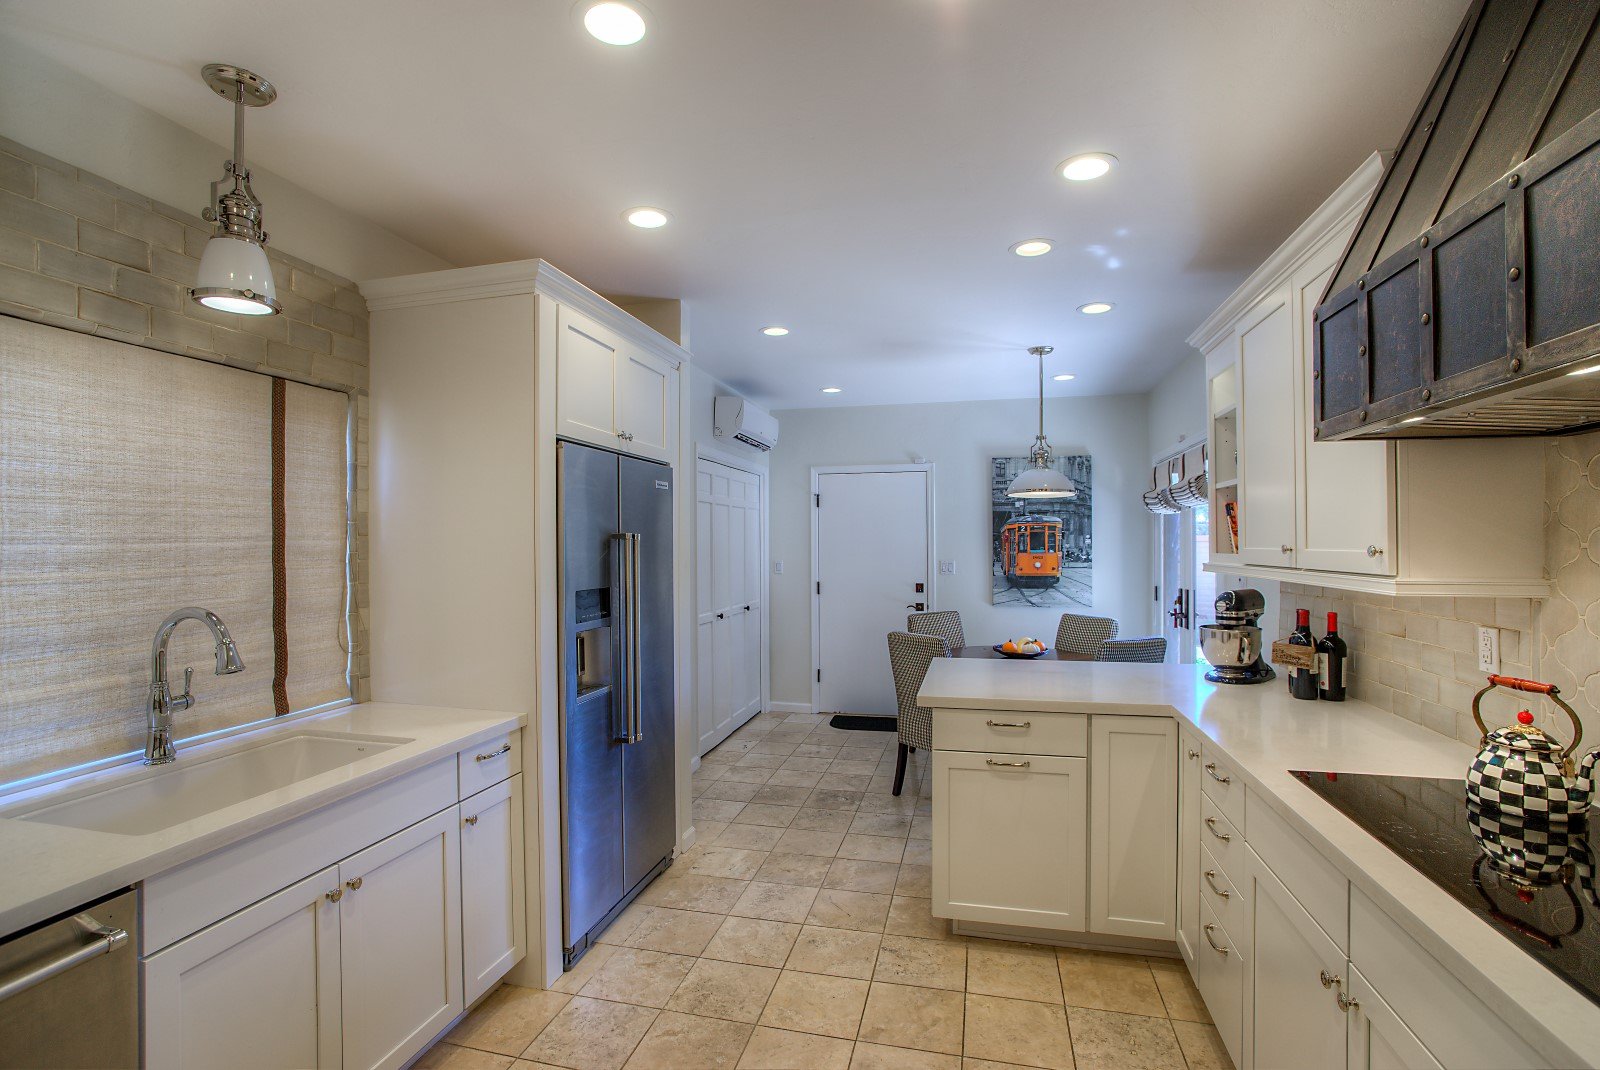 White cabinetry and white countertops